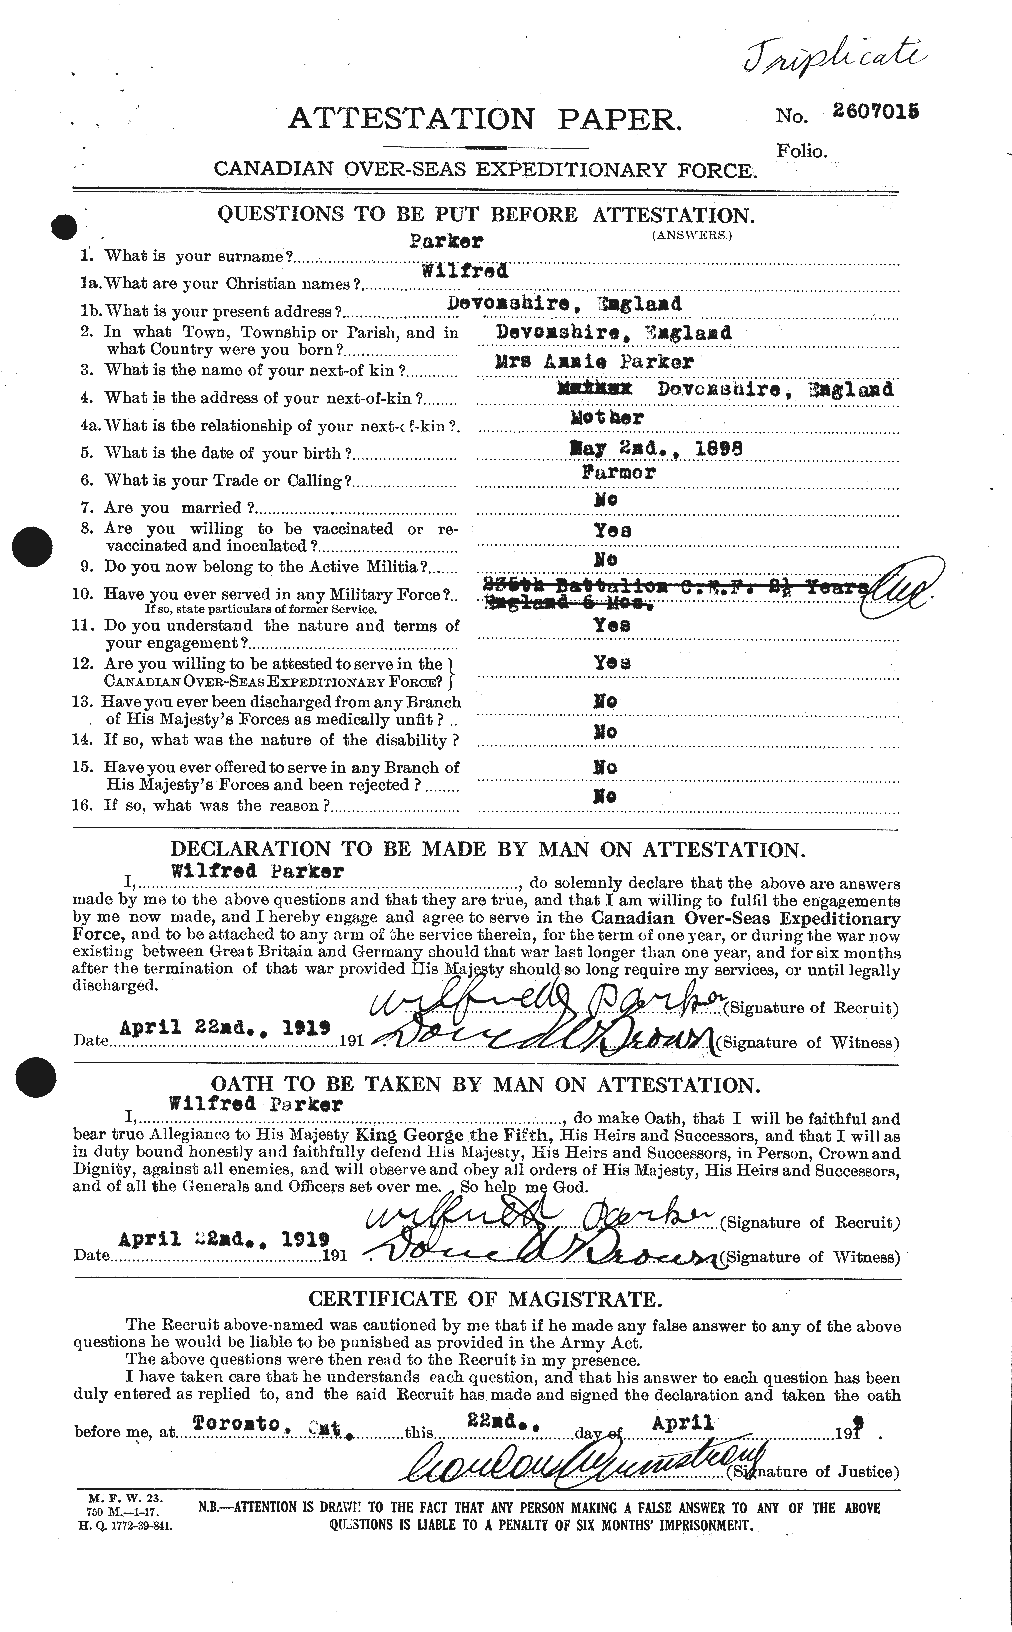 Personnel Records of the First World War - CEF 565706a